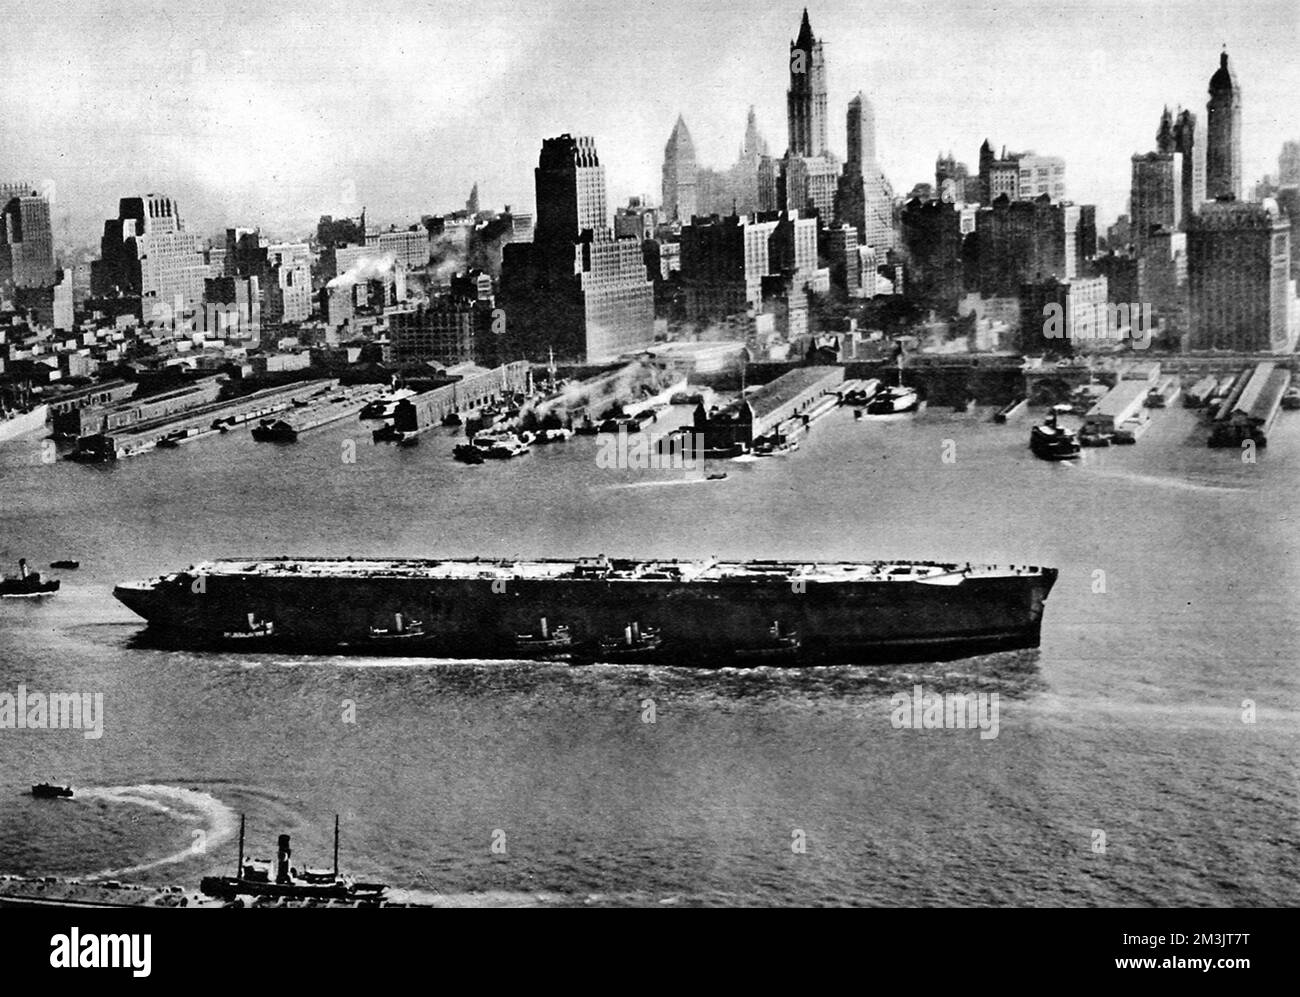 The 'Normandie' in New York Harbour, November 1943. The 'Normandie' had just been refloated and was being towed to dry dock for repairs, after catching fire and capsizing in the harbour during 1942. She was renamed 'Lafayette' by the US government and was intended to be refitted for war service. The estimated cost of the refit was 24,500,000 dollars.     Date: 1943 Stock Photo